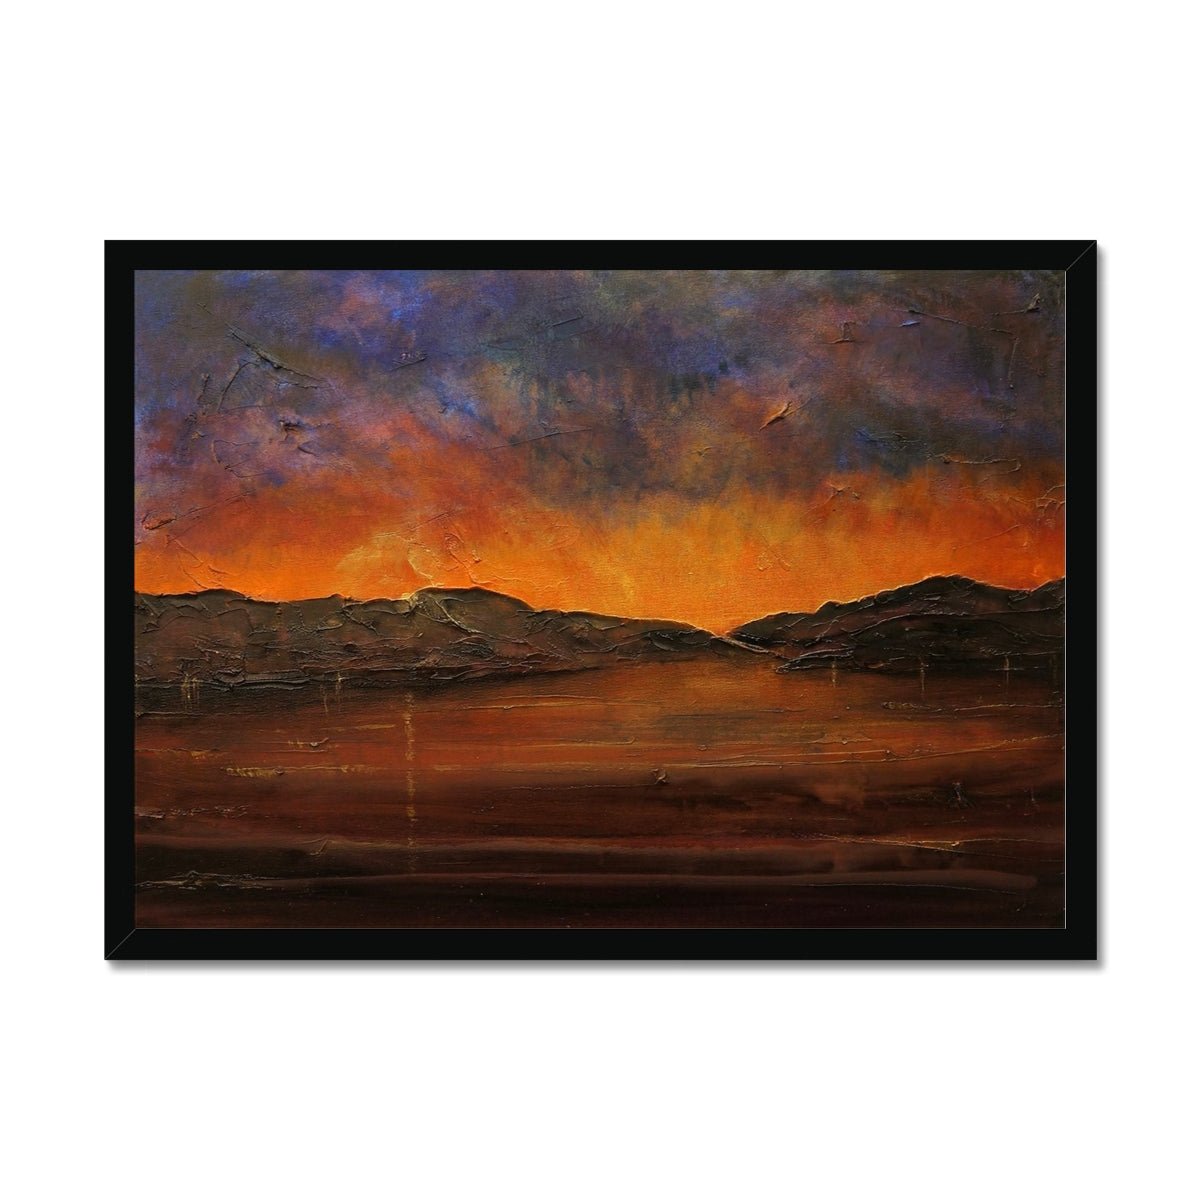 A Brooding River Clyde Dusk Painting | Framed Prints From Scotland-Framed Prints-River Clyde Art Gallery-A2 Landscape-Black Frame-Paintings, Prints, Homeware, Art Gifts From Scotland By Scottish Artist Kevin Hunter